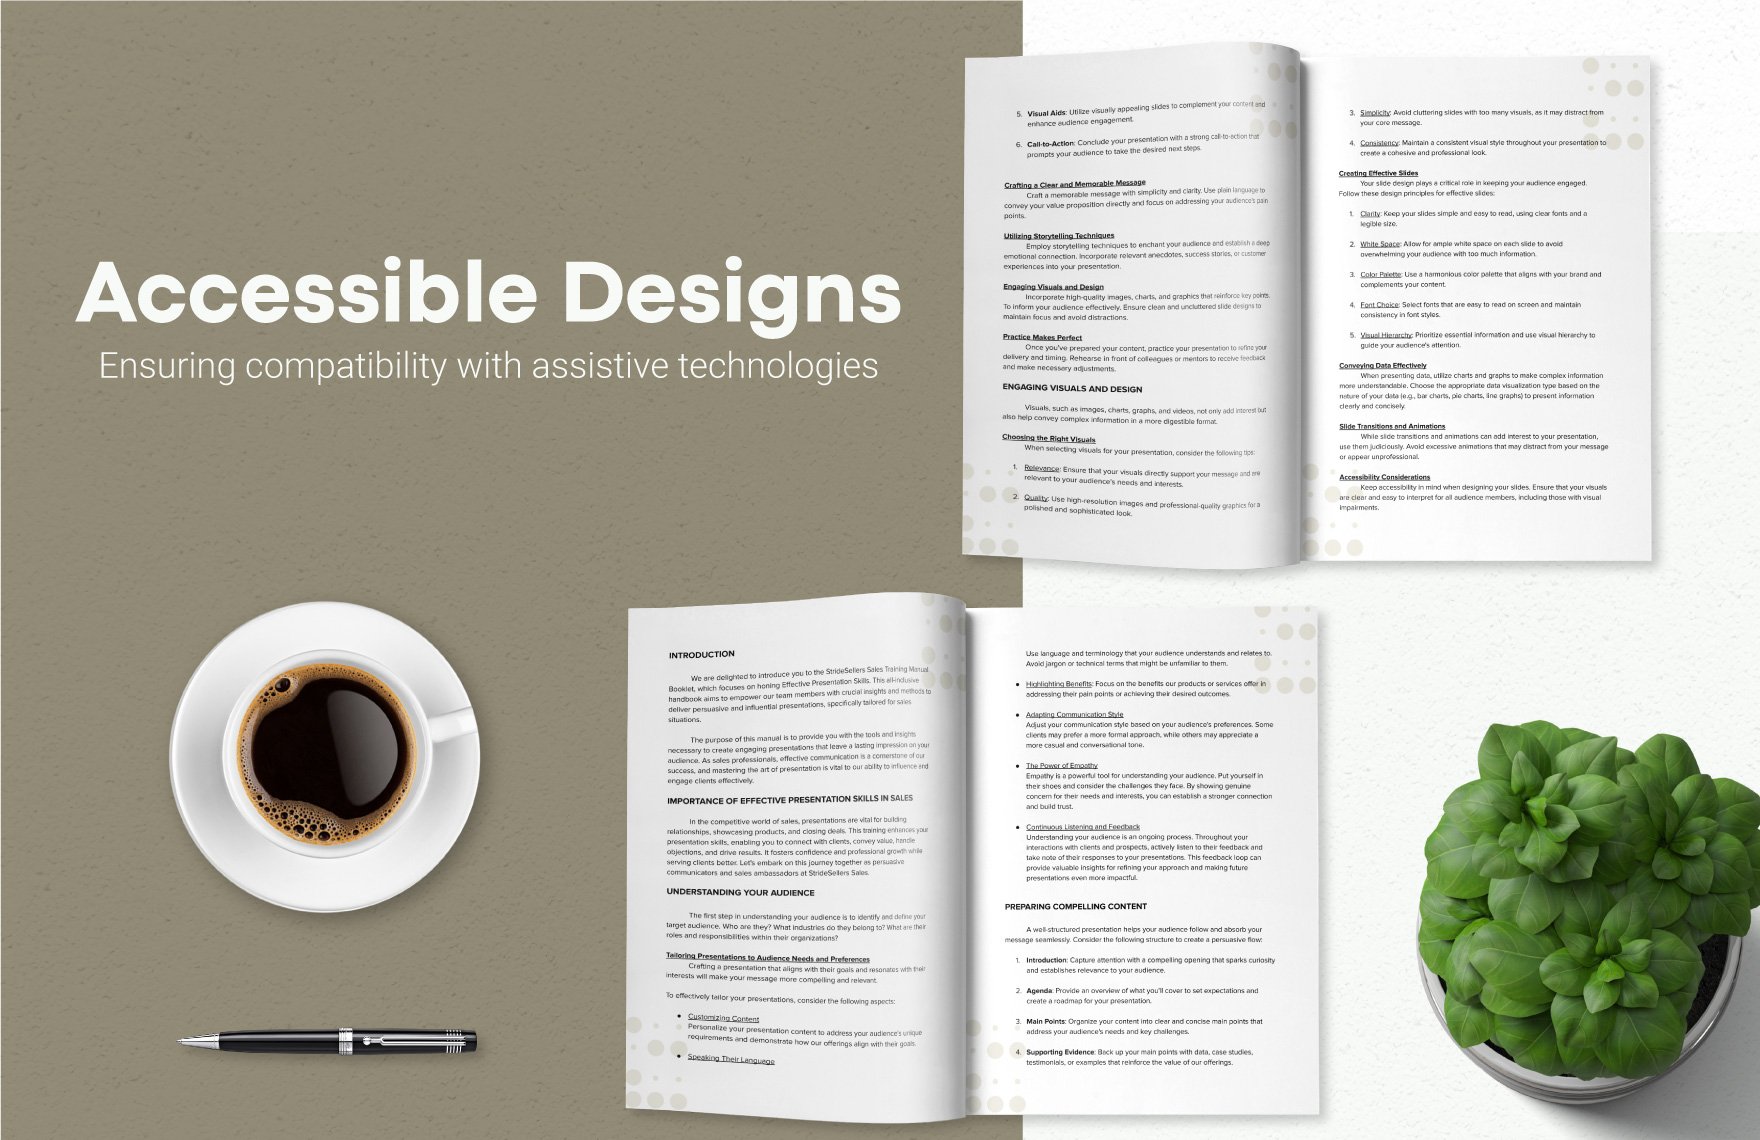 Training Manual Booklet Template